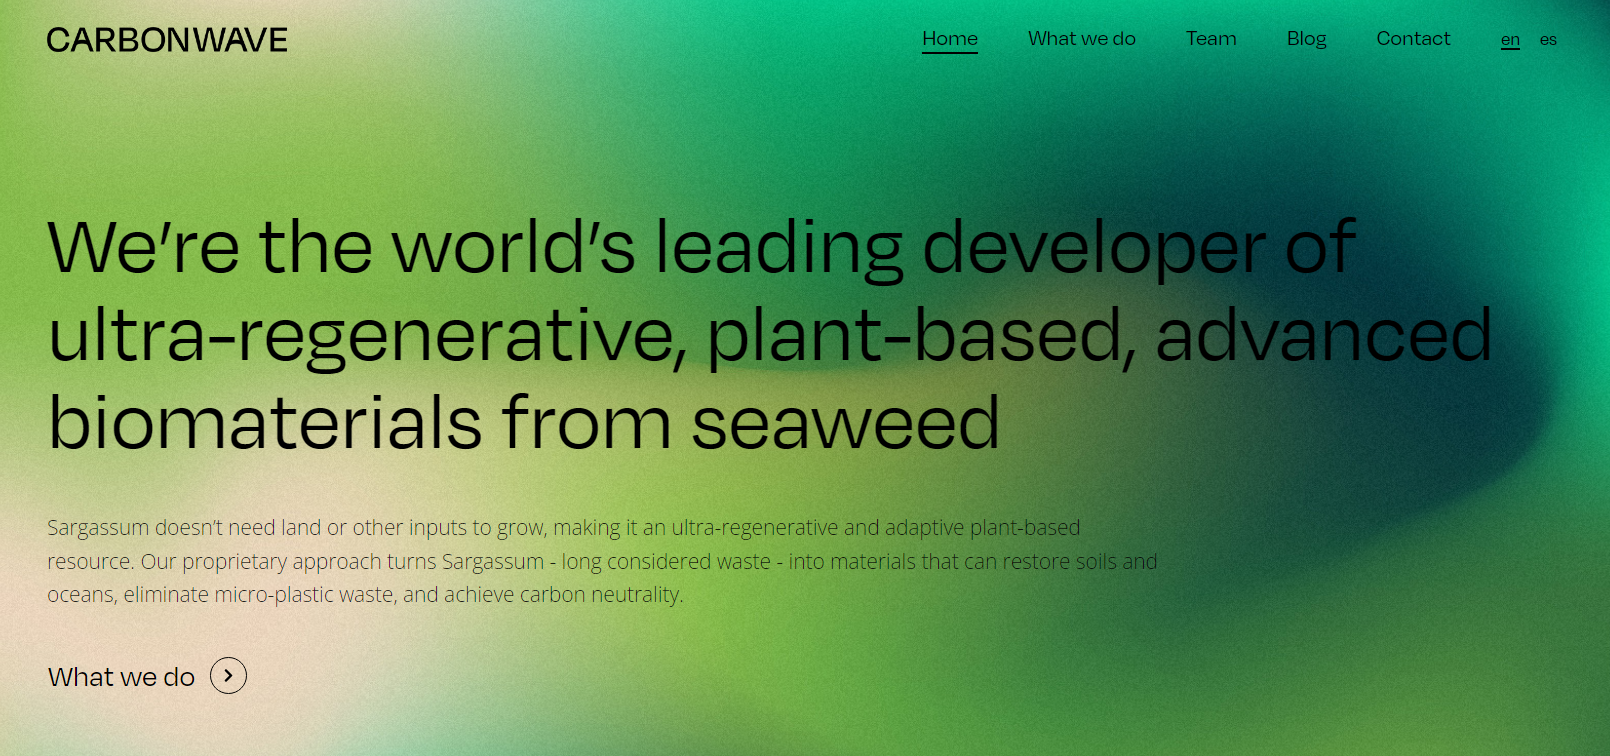 Carbonwave Secures $5M in Funding to Further its Mission of Creating Advanced Biomaterials from Seaweed.